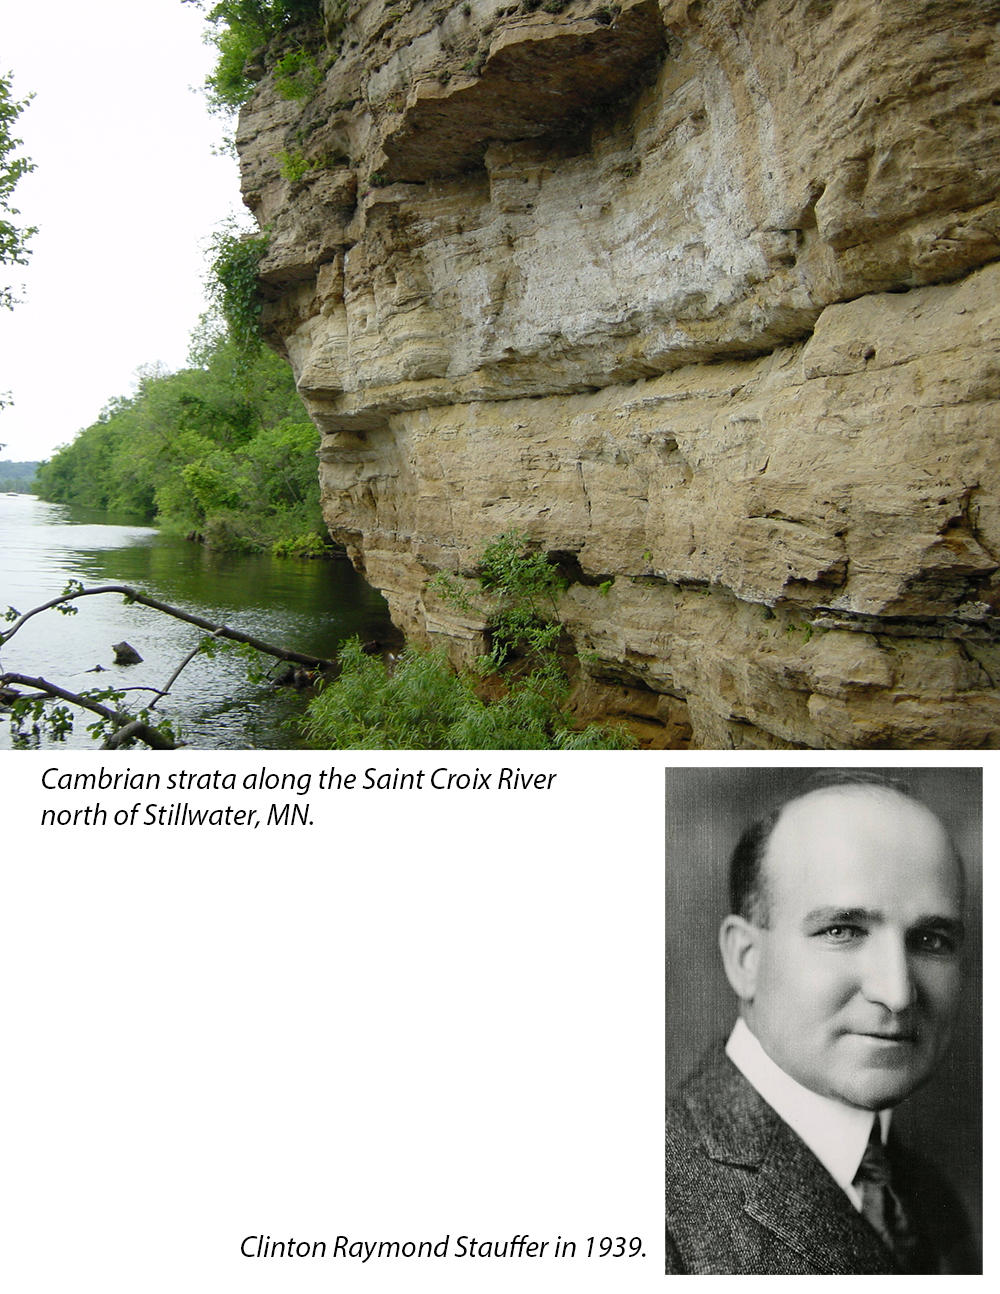 Cambrian rocks along the St. Croix River and Clinton Stauffer in 1939.